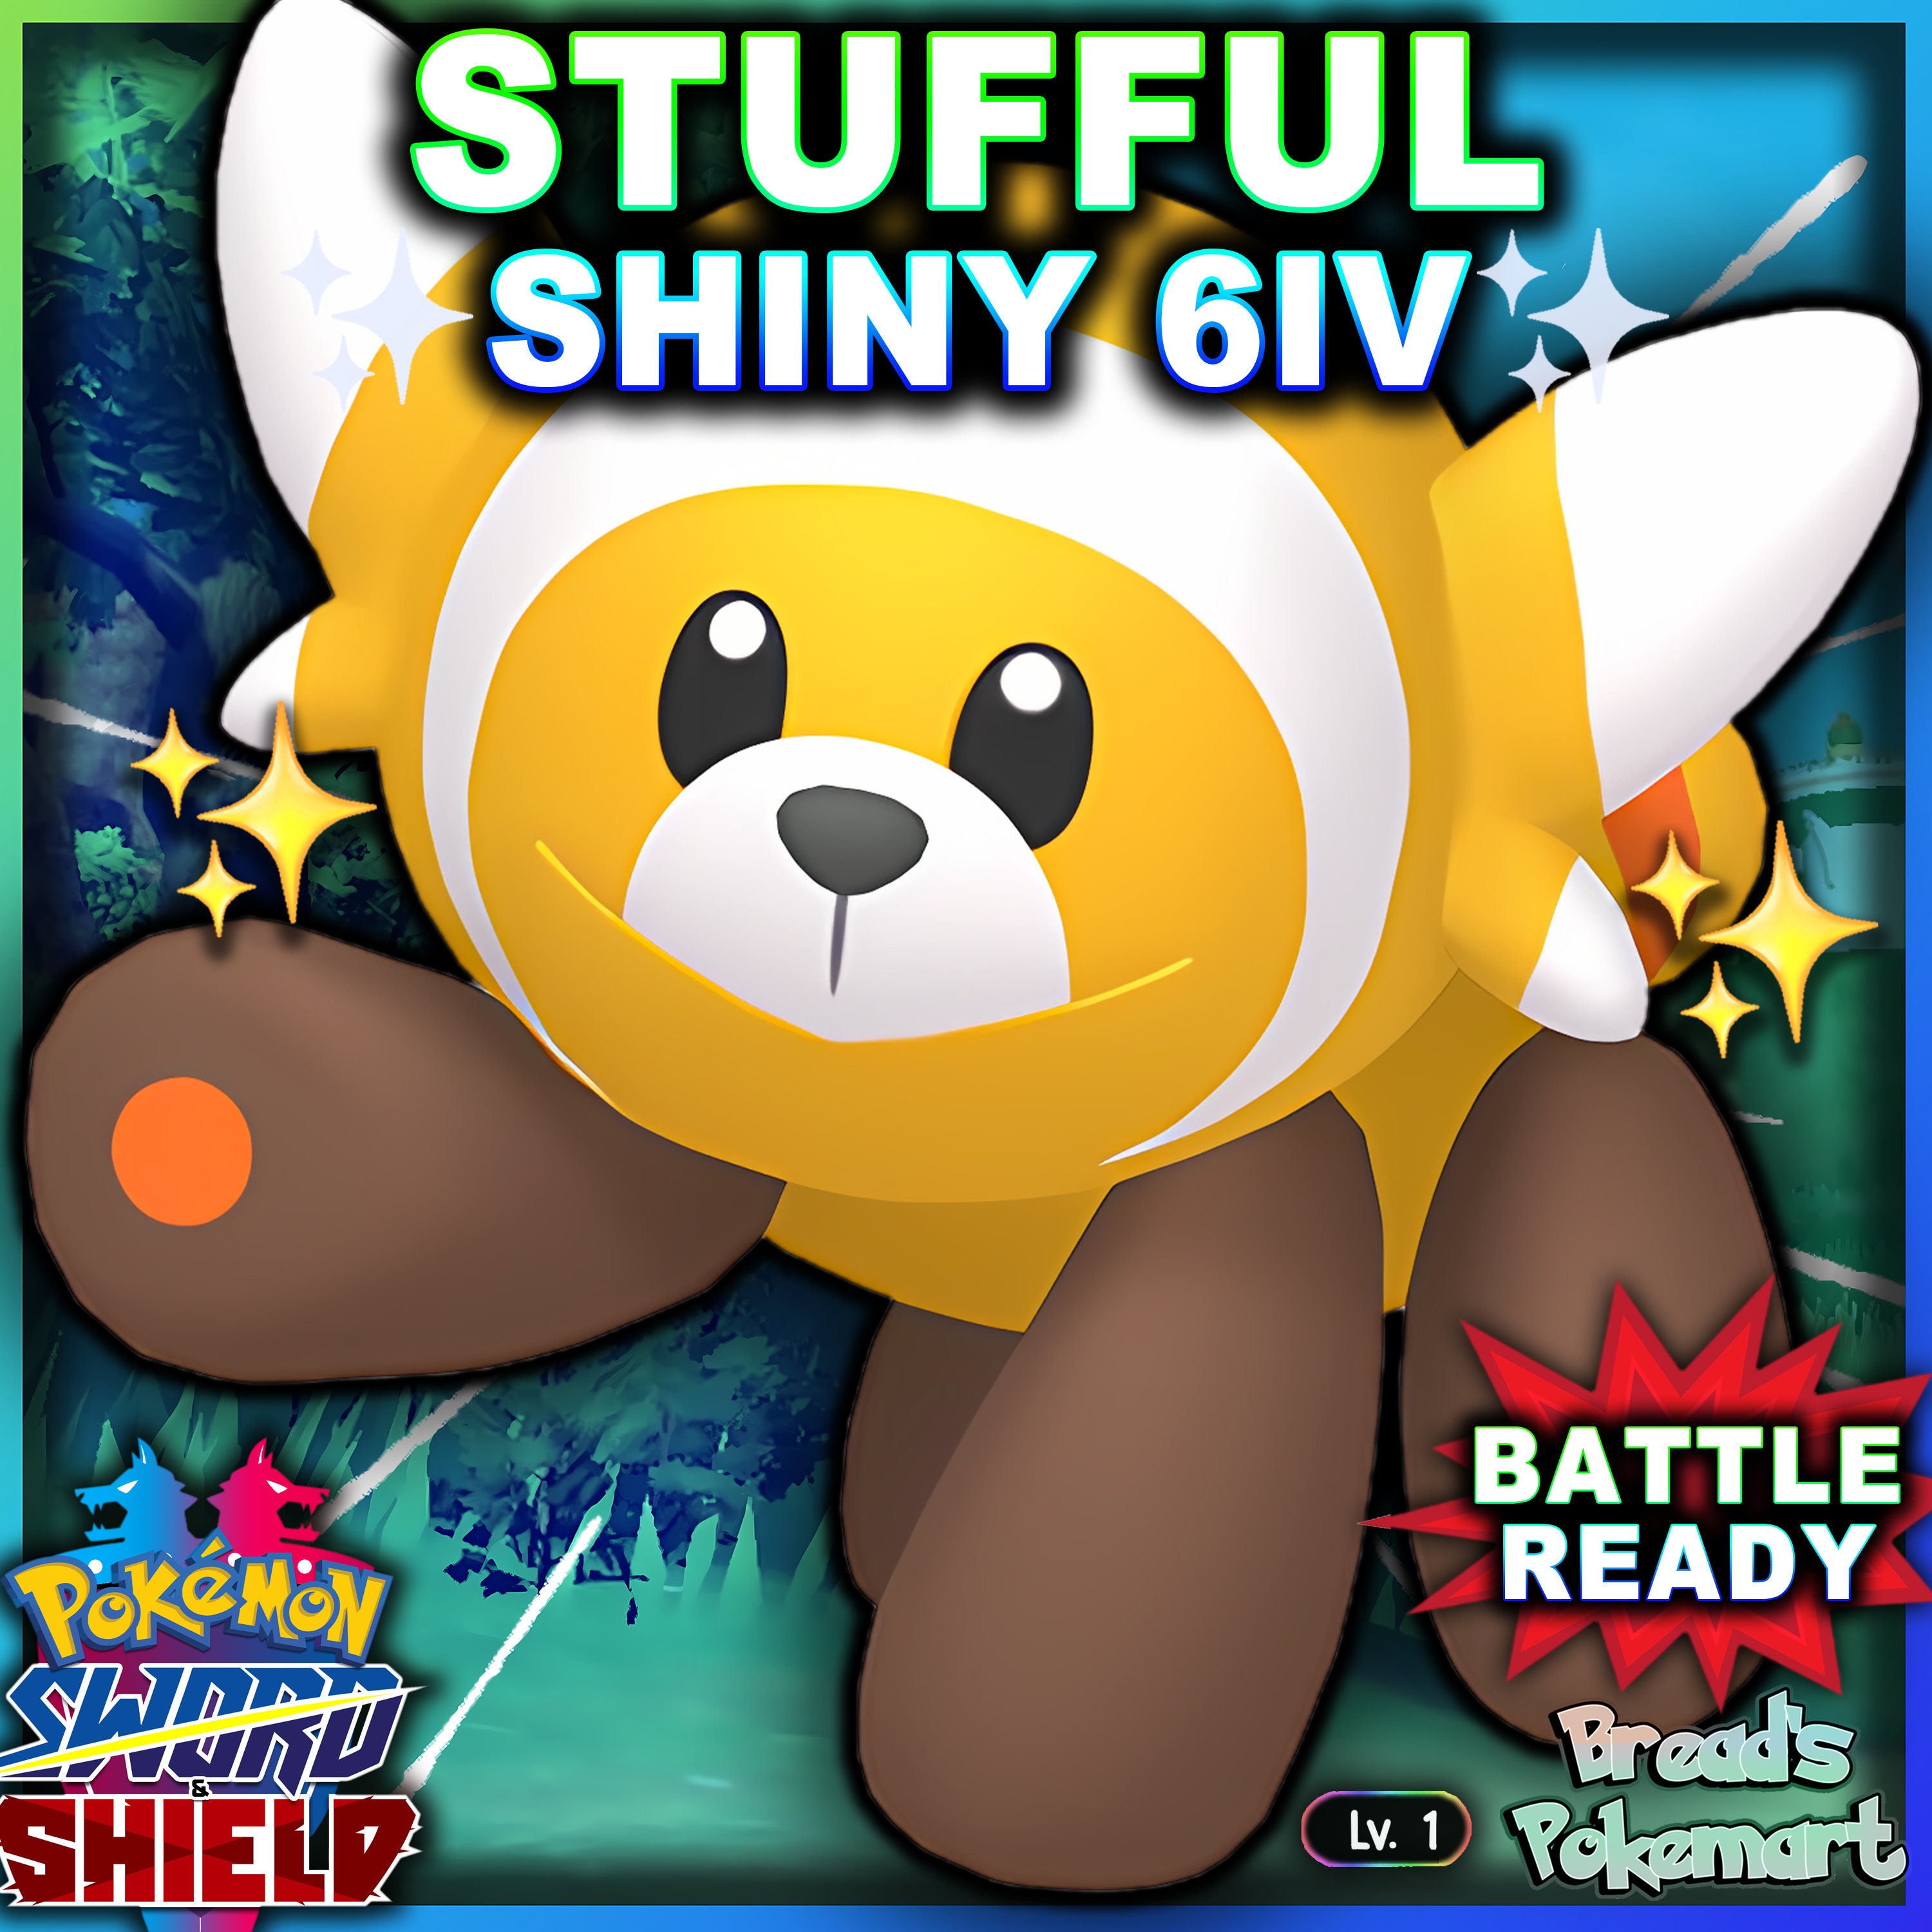 Pokemon Sword And Shield Shiny Toxel (Low Key) 6IV Battle Ready Fast  Delivery